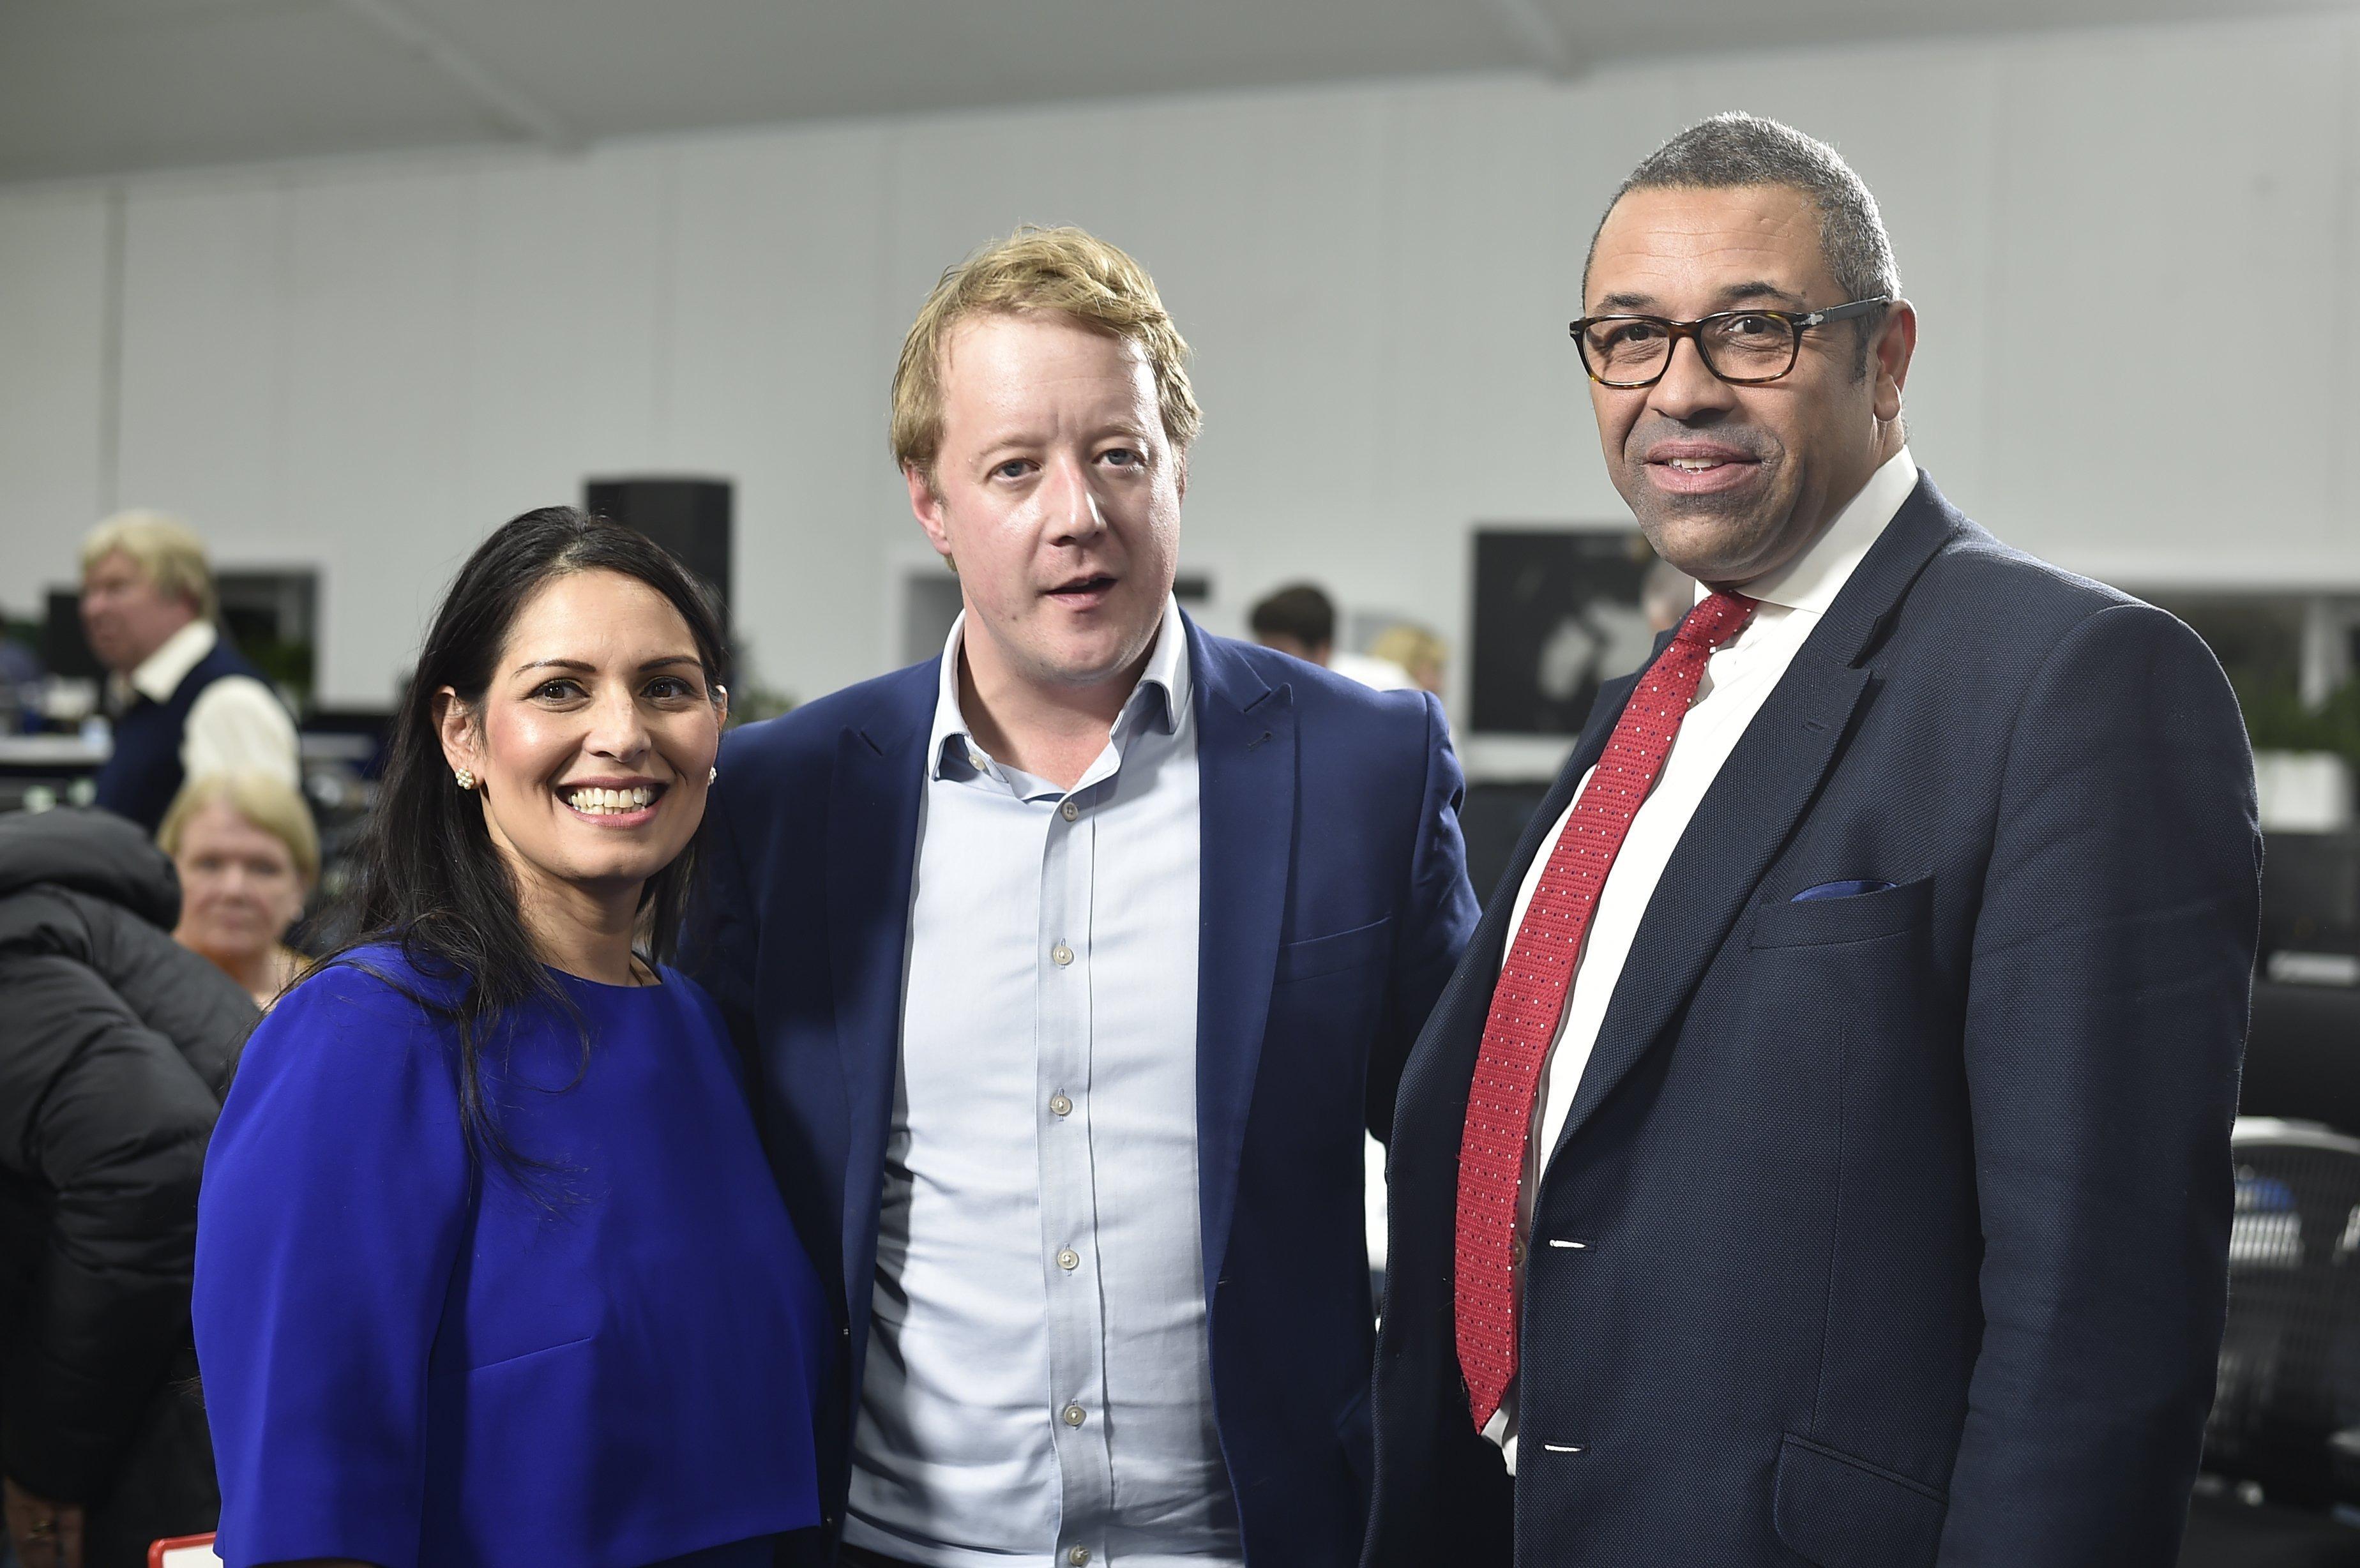 Priti Patel, Paul Bristow and James Cleverly